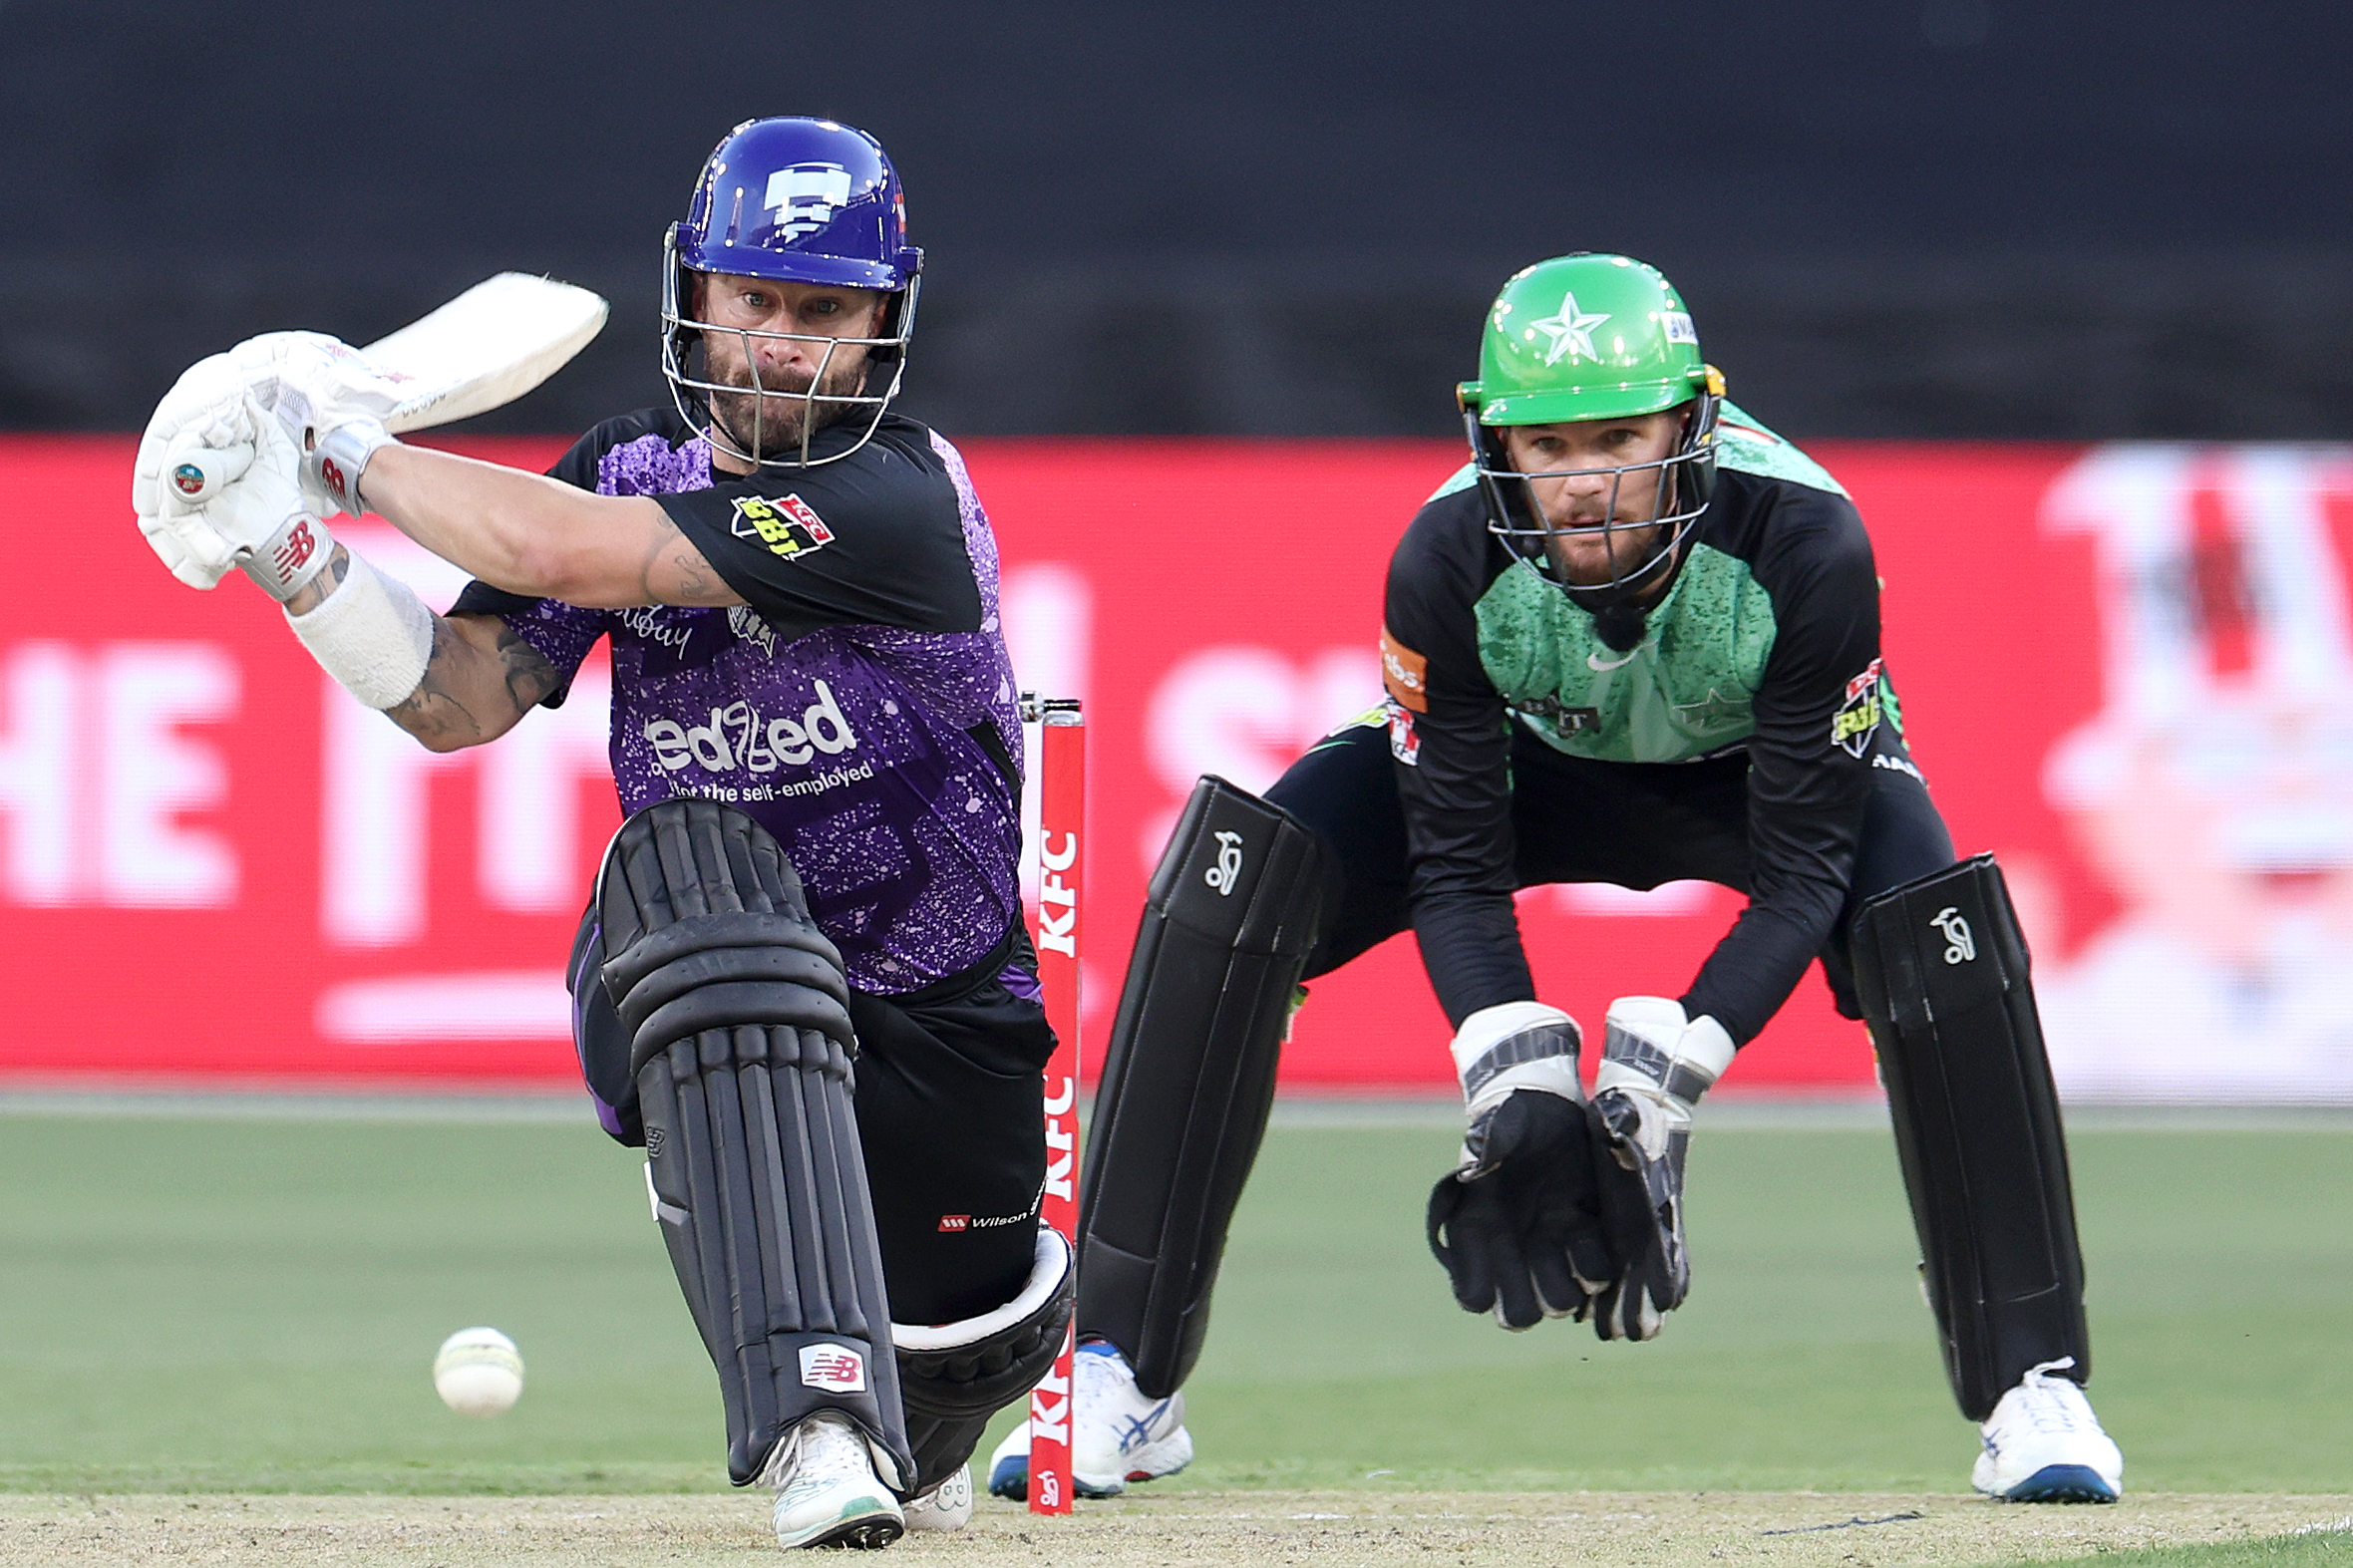 BBL 13 | Twitter lauds Melbourne Stars’ brilliant win in nail biting thriller against Hurricanes at MCG